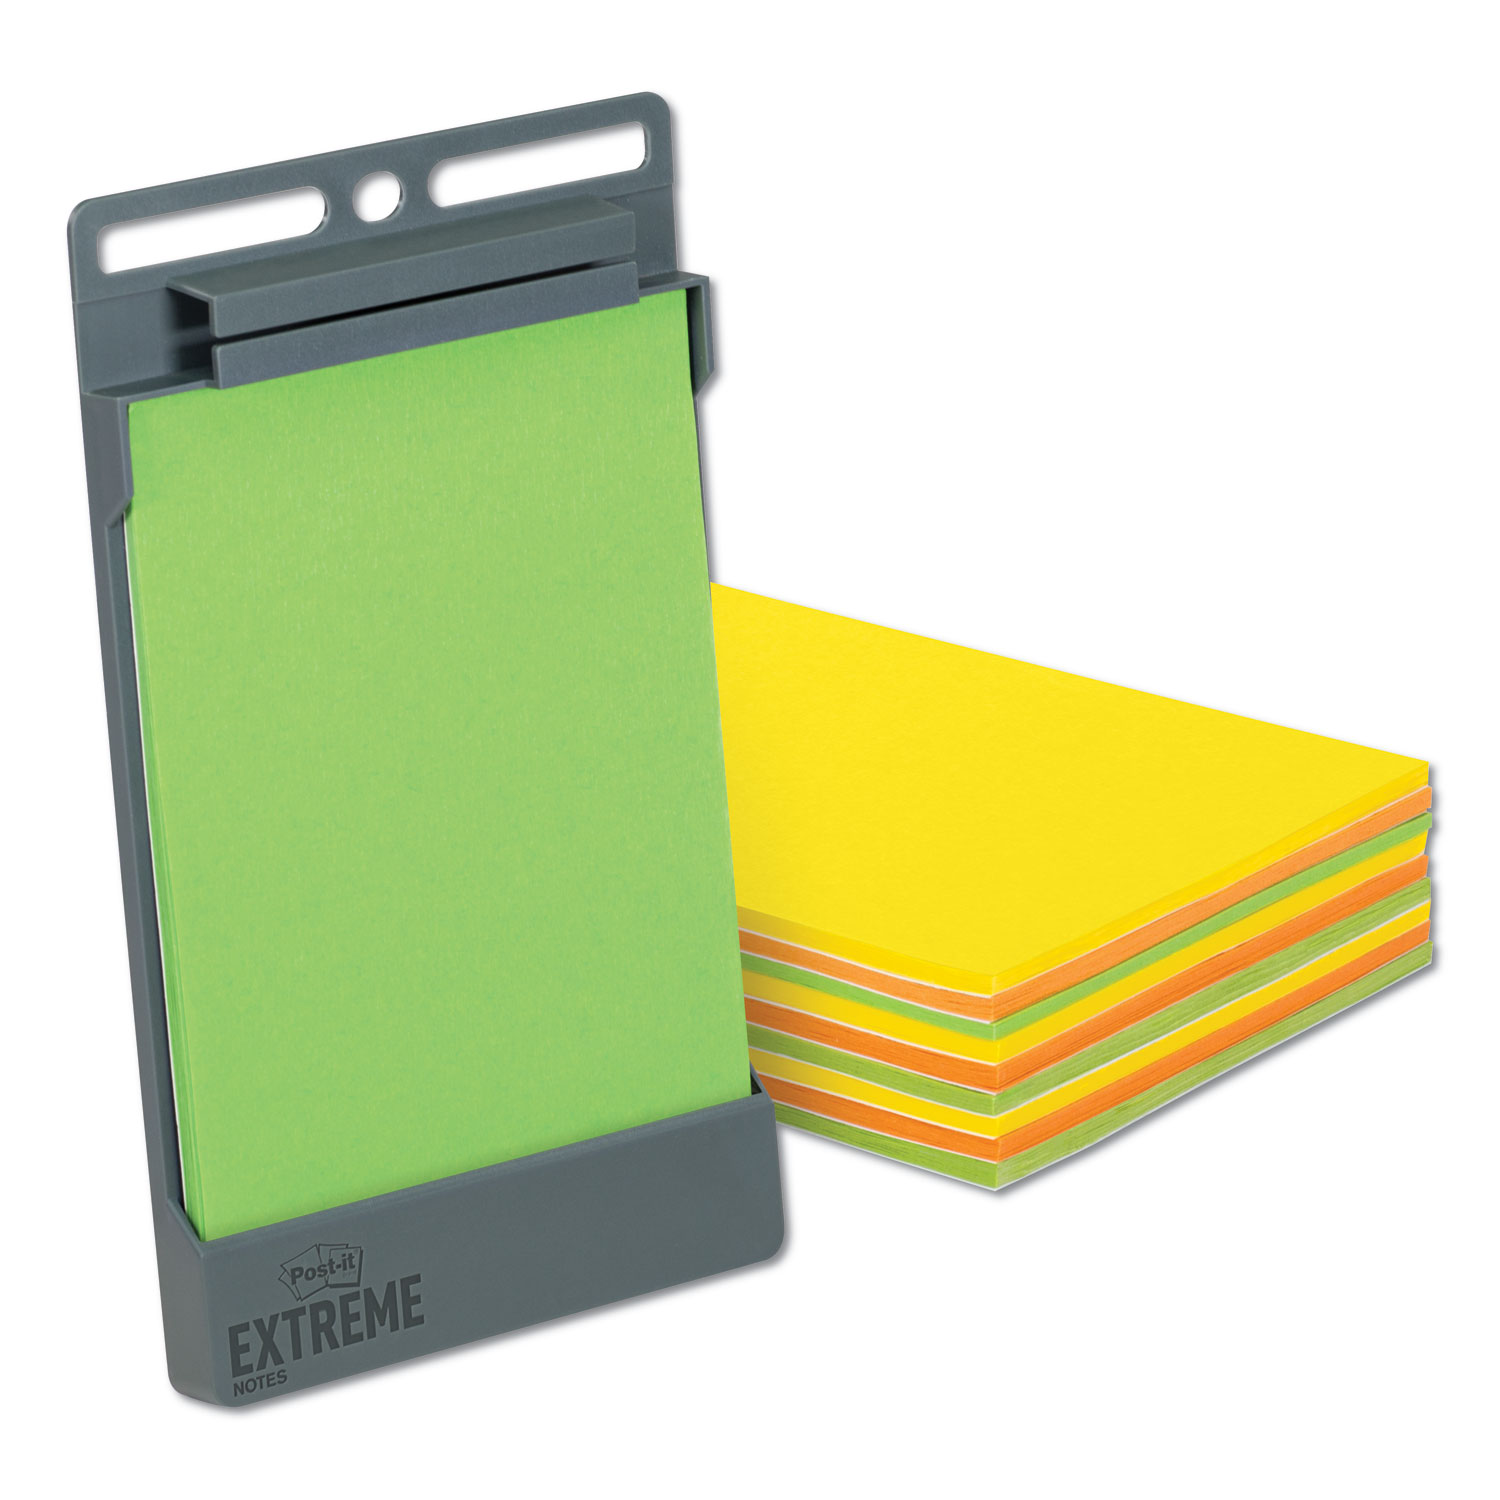 Post-it Extreme Notes, 3 x 3, Assorted Colors, 3 Pads